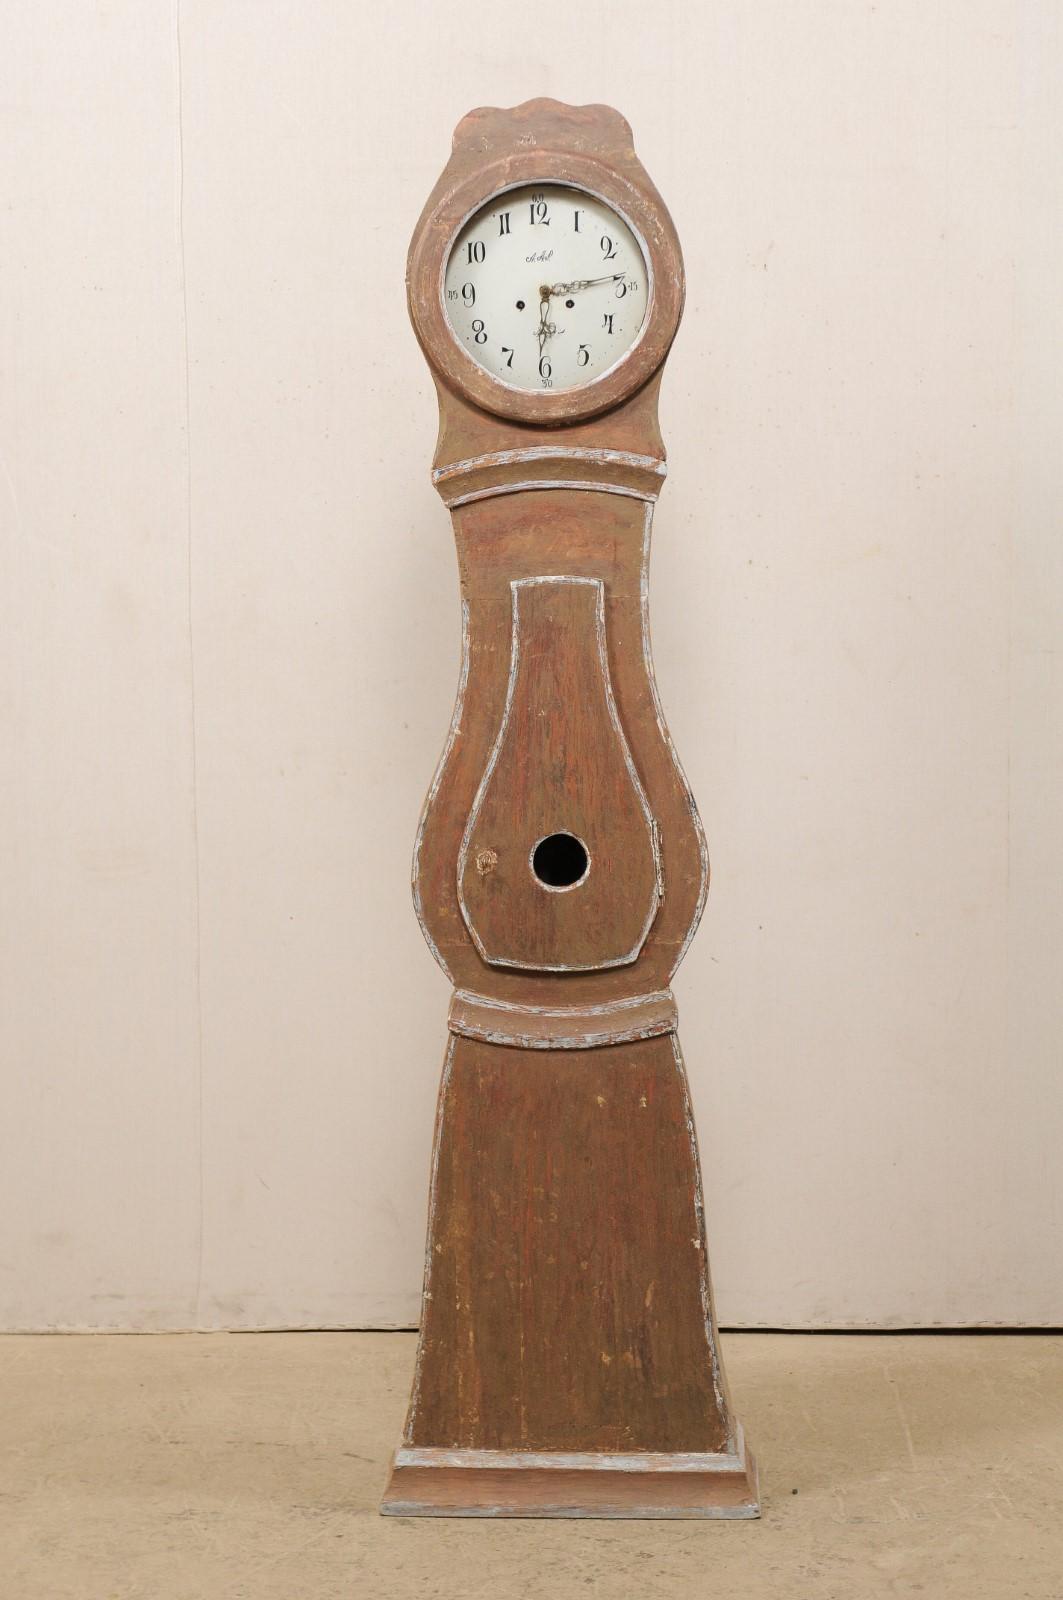 A Swedish painted wood mora clock from the 19th century. This antique mora clock from Sweden features a subtle scalloped crown adorning it's head, a teardrop-shaped door and belly, triangular lower section, and is supported upon a flat platform